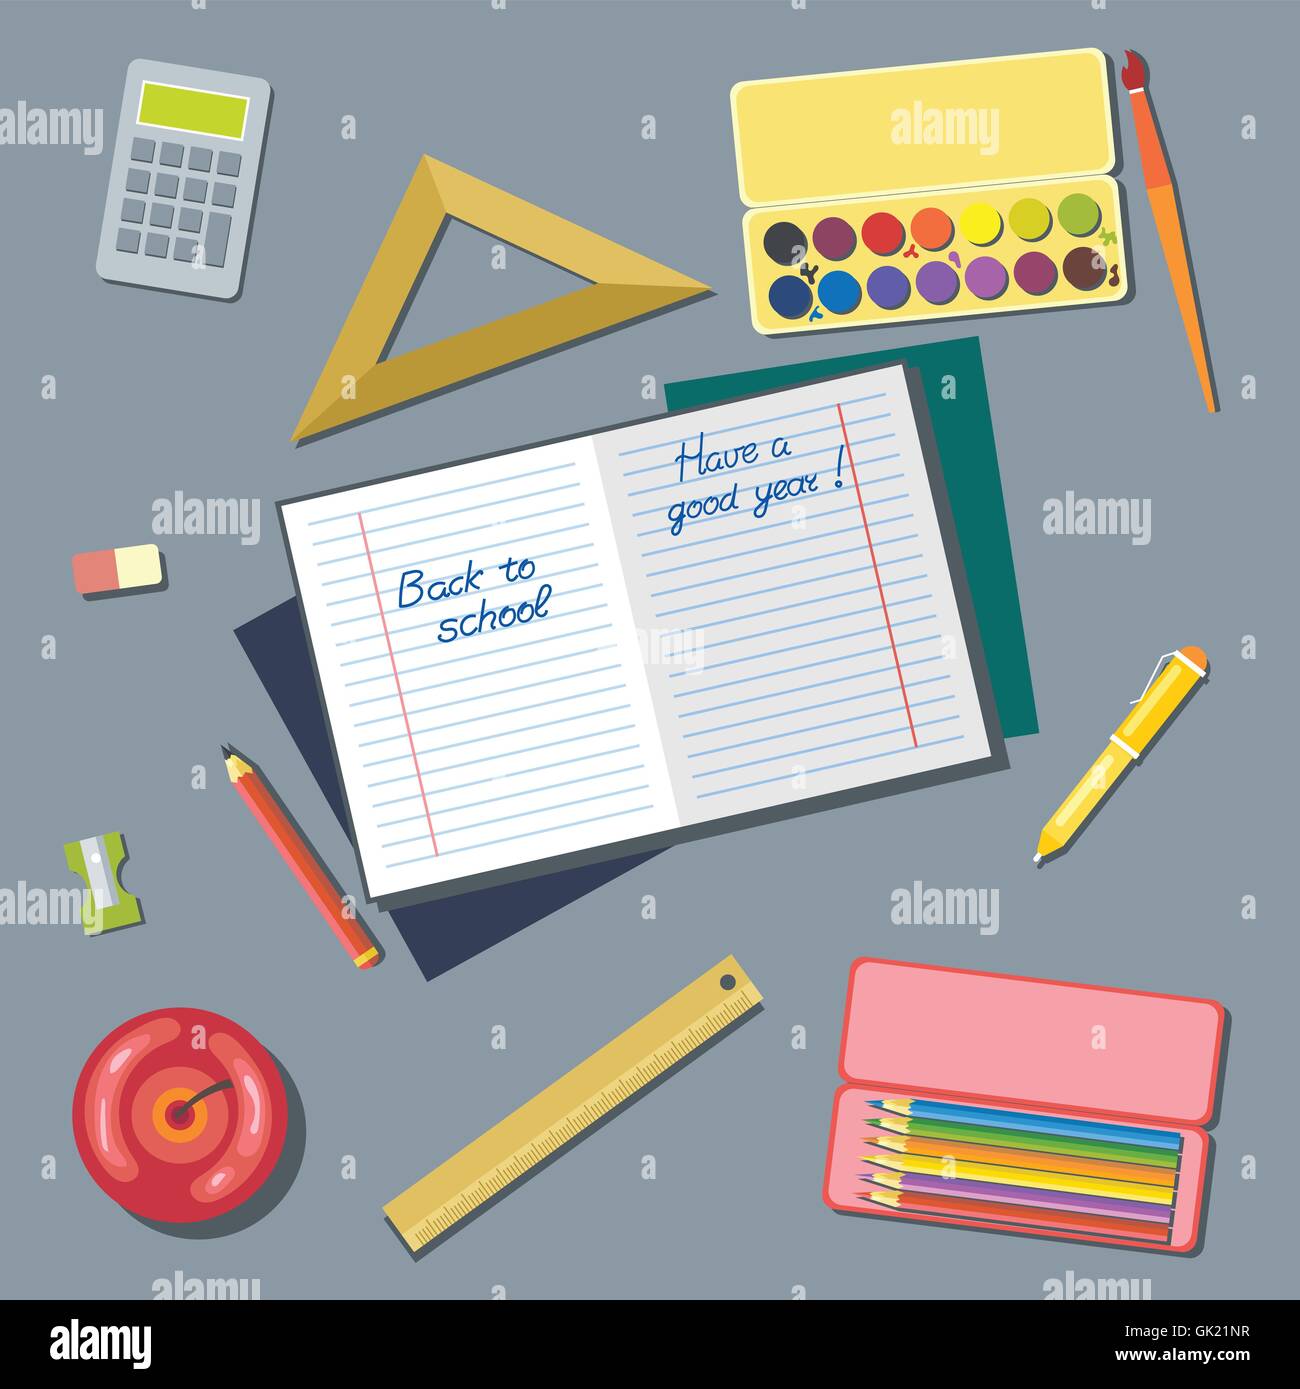 Welcome back to school and have a good year card. Digital vector image Stock Vector